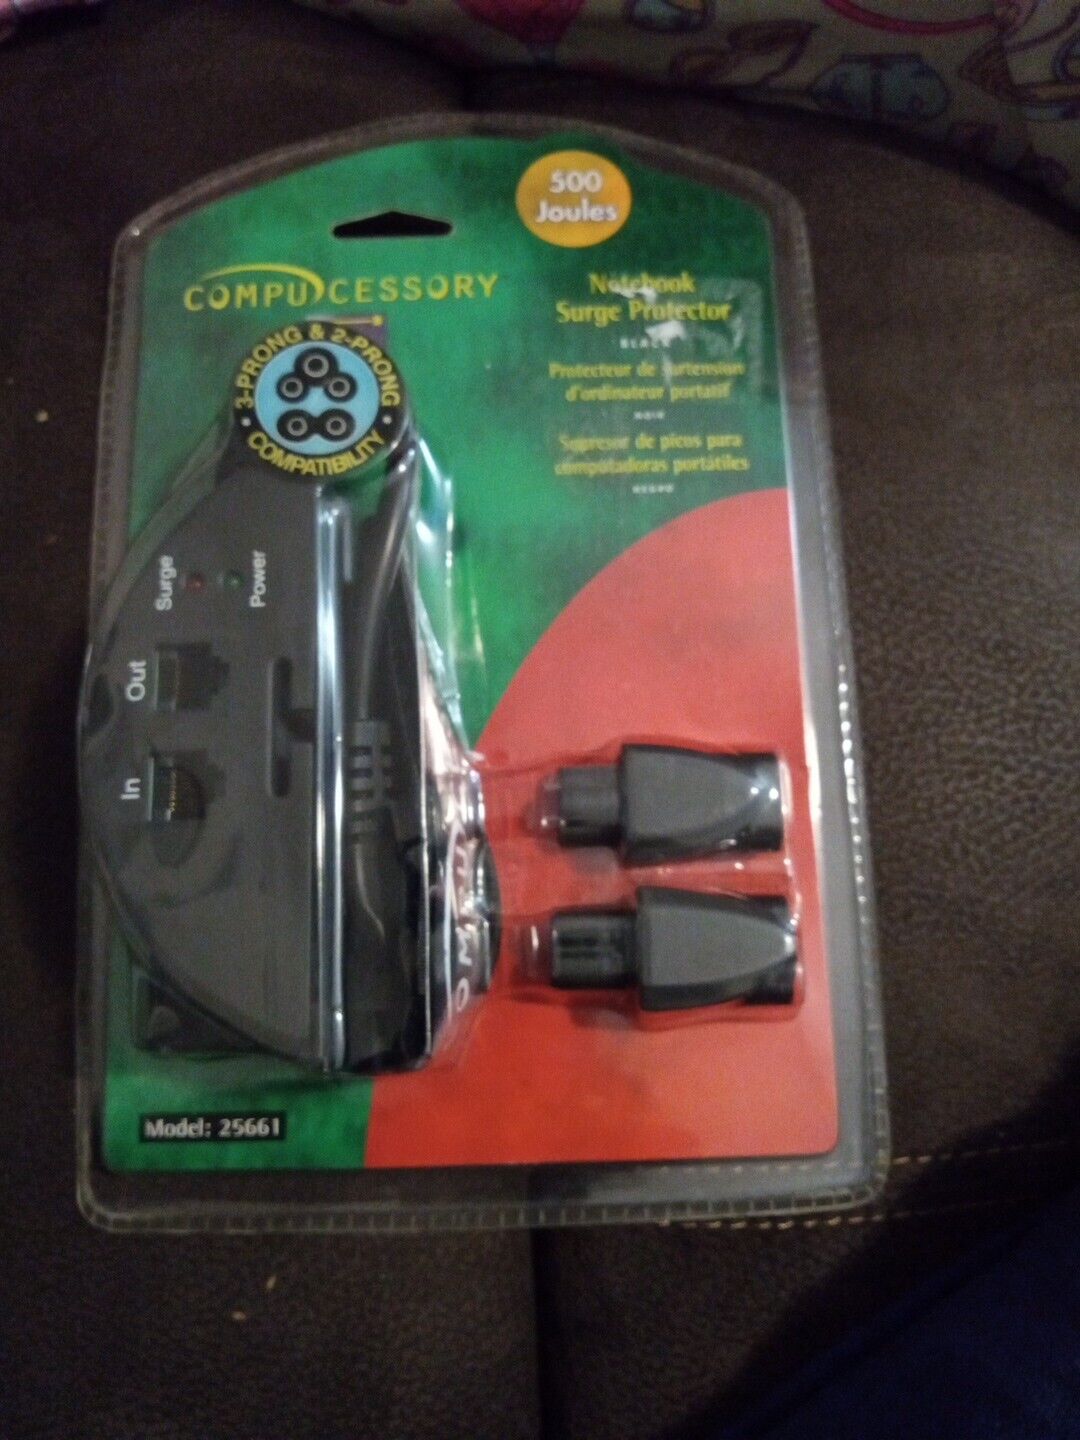 Compucessory CCS25661 Notebook Surge Protector 500 Joules Laptop 2-/3-Prong  NEW